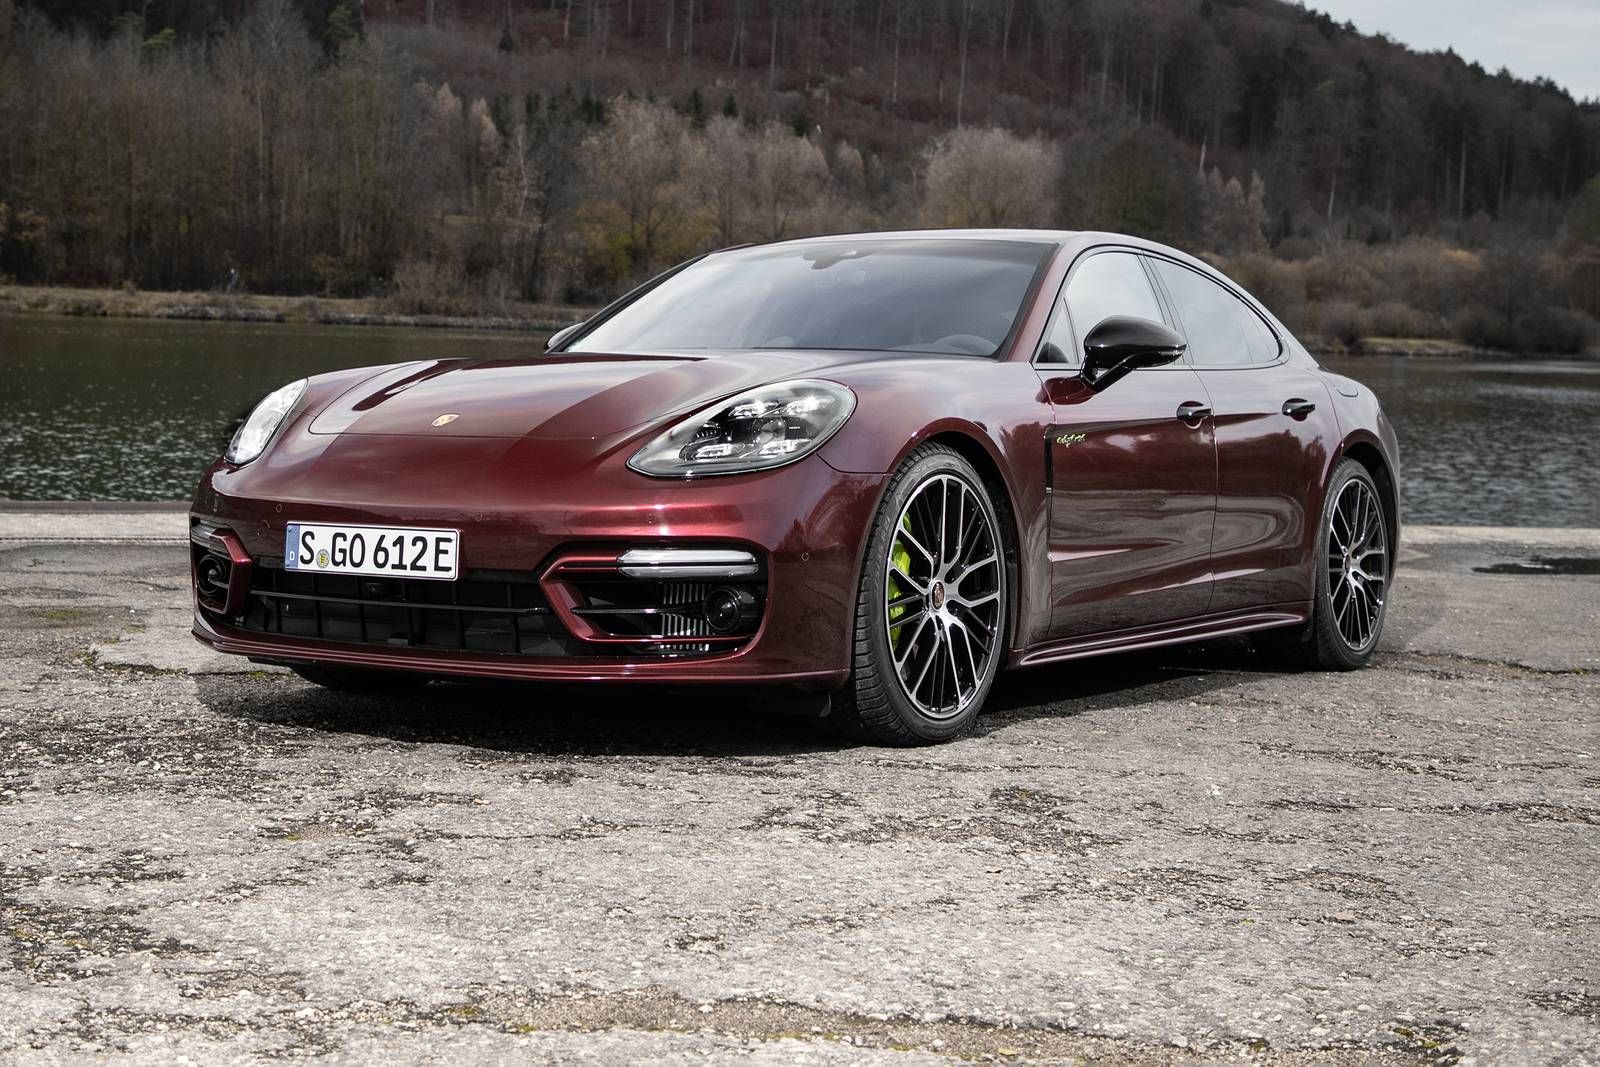 2021 Porsche Panamera 4S Hybrid: Sports coupe ready for speed, able to chill.